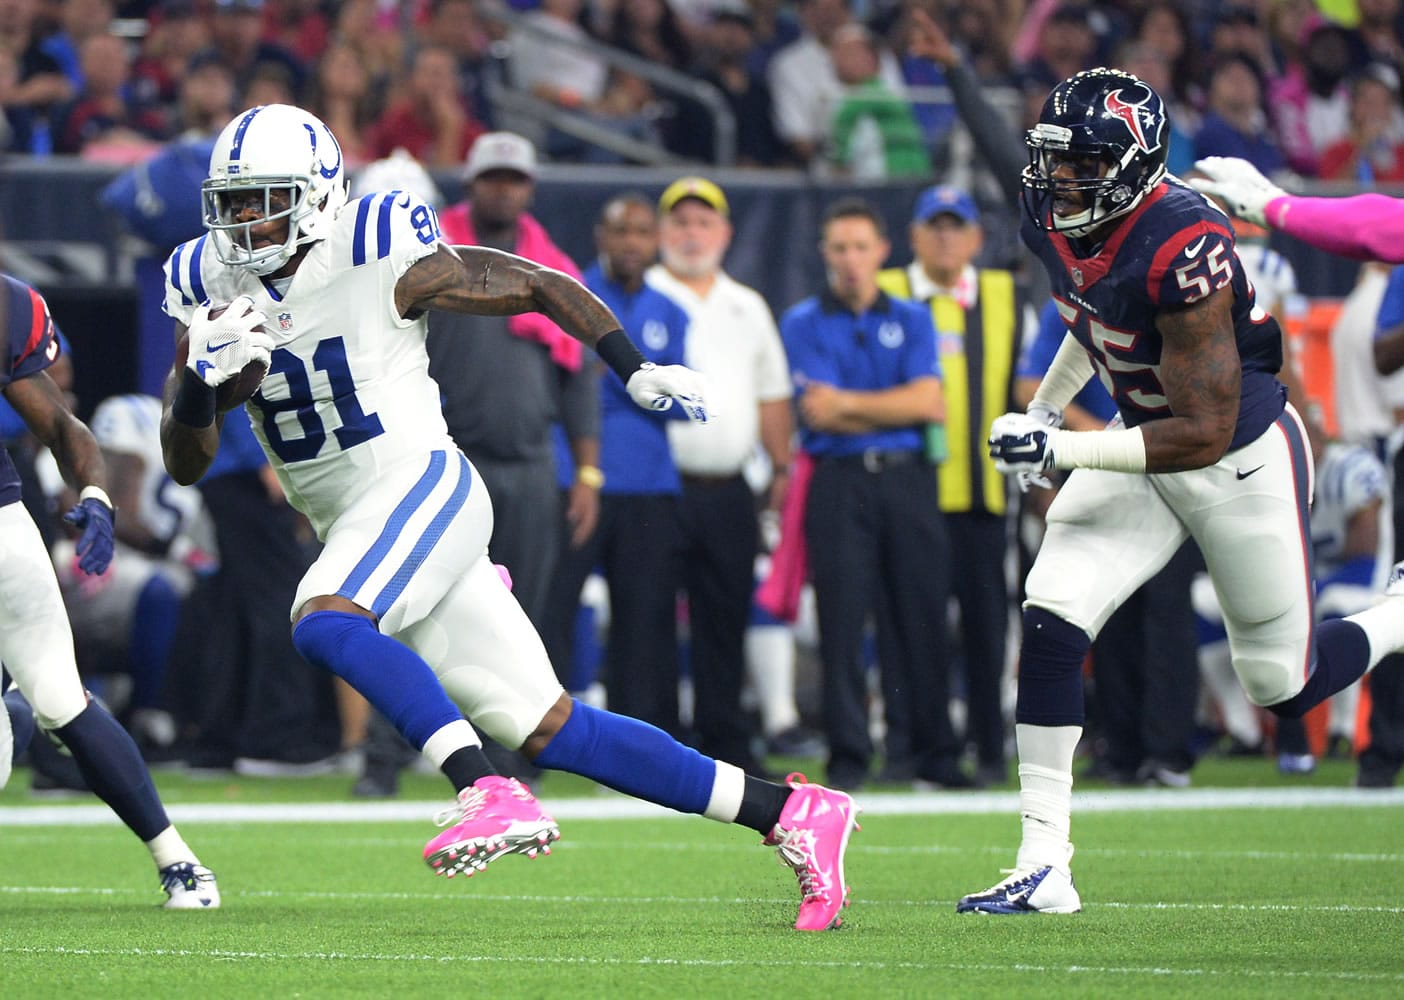 Indianapolis Colts' Andre Johnson is chased by Houston Texans' Benardrick McKinney (55) after a reception during the first half Thursday, Oct. 8, 2015, in Houston.